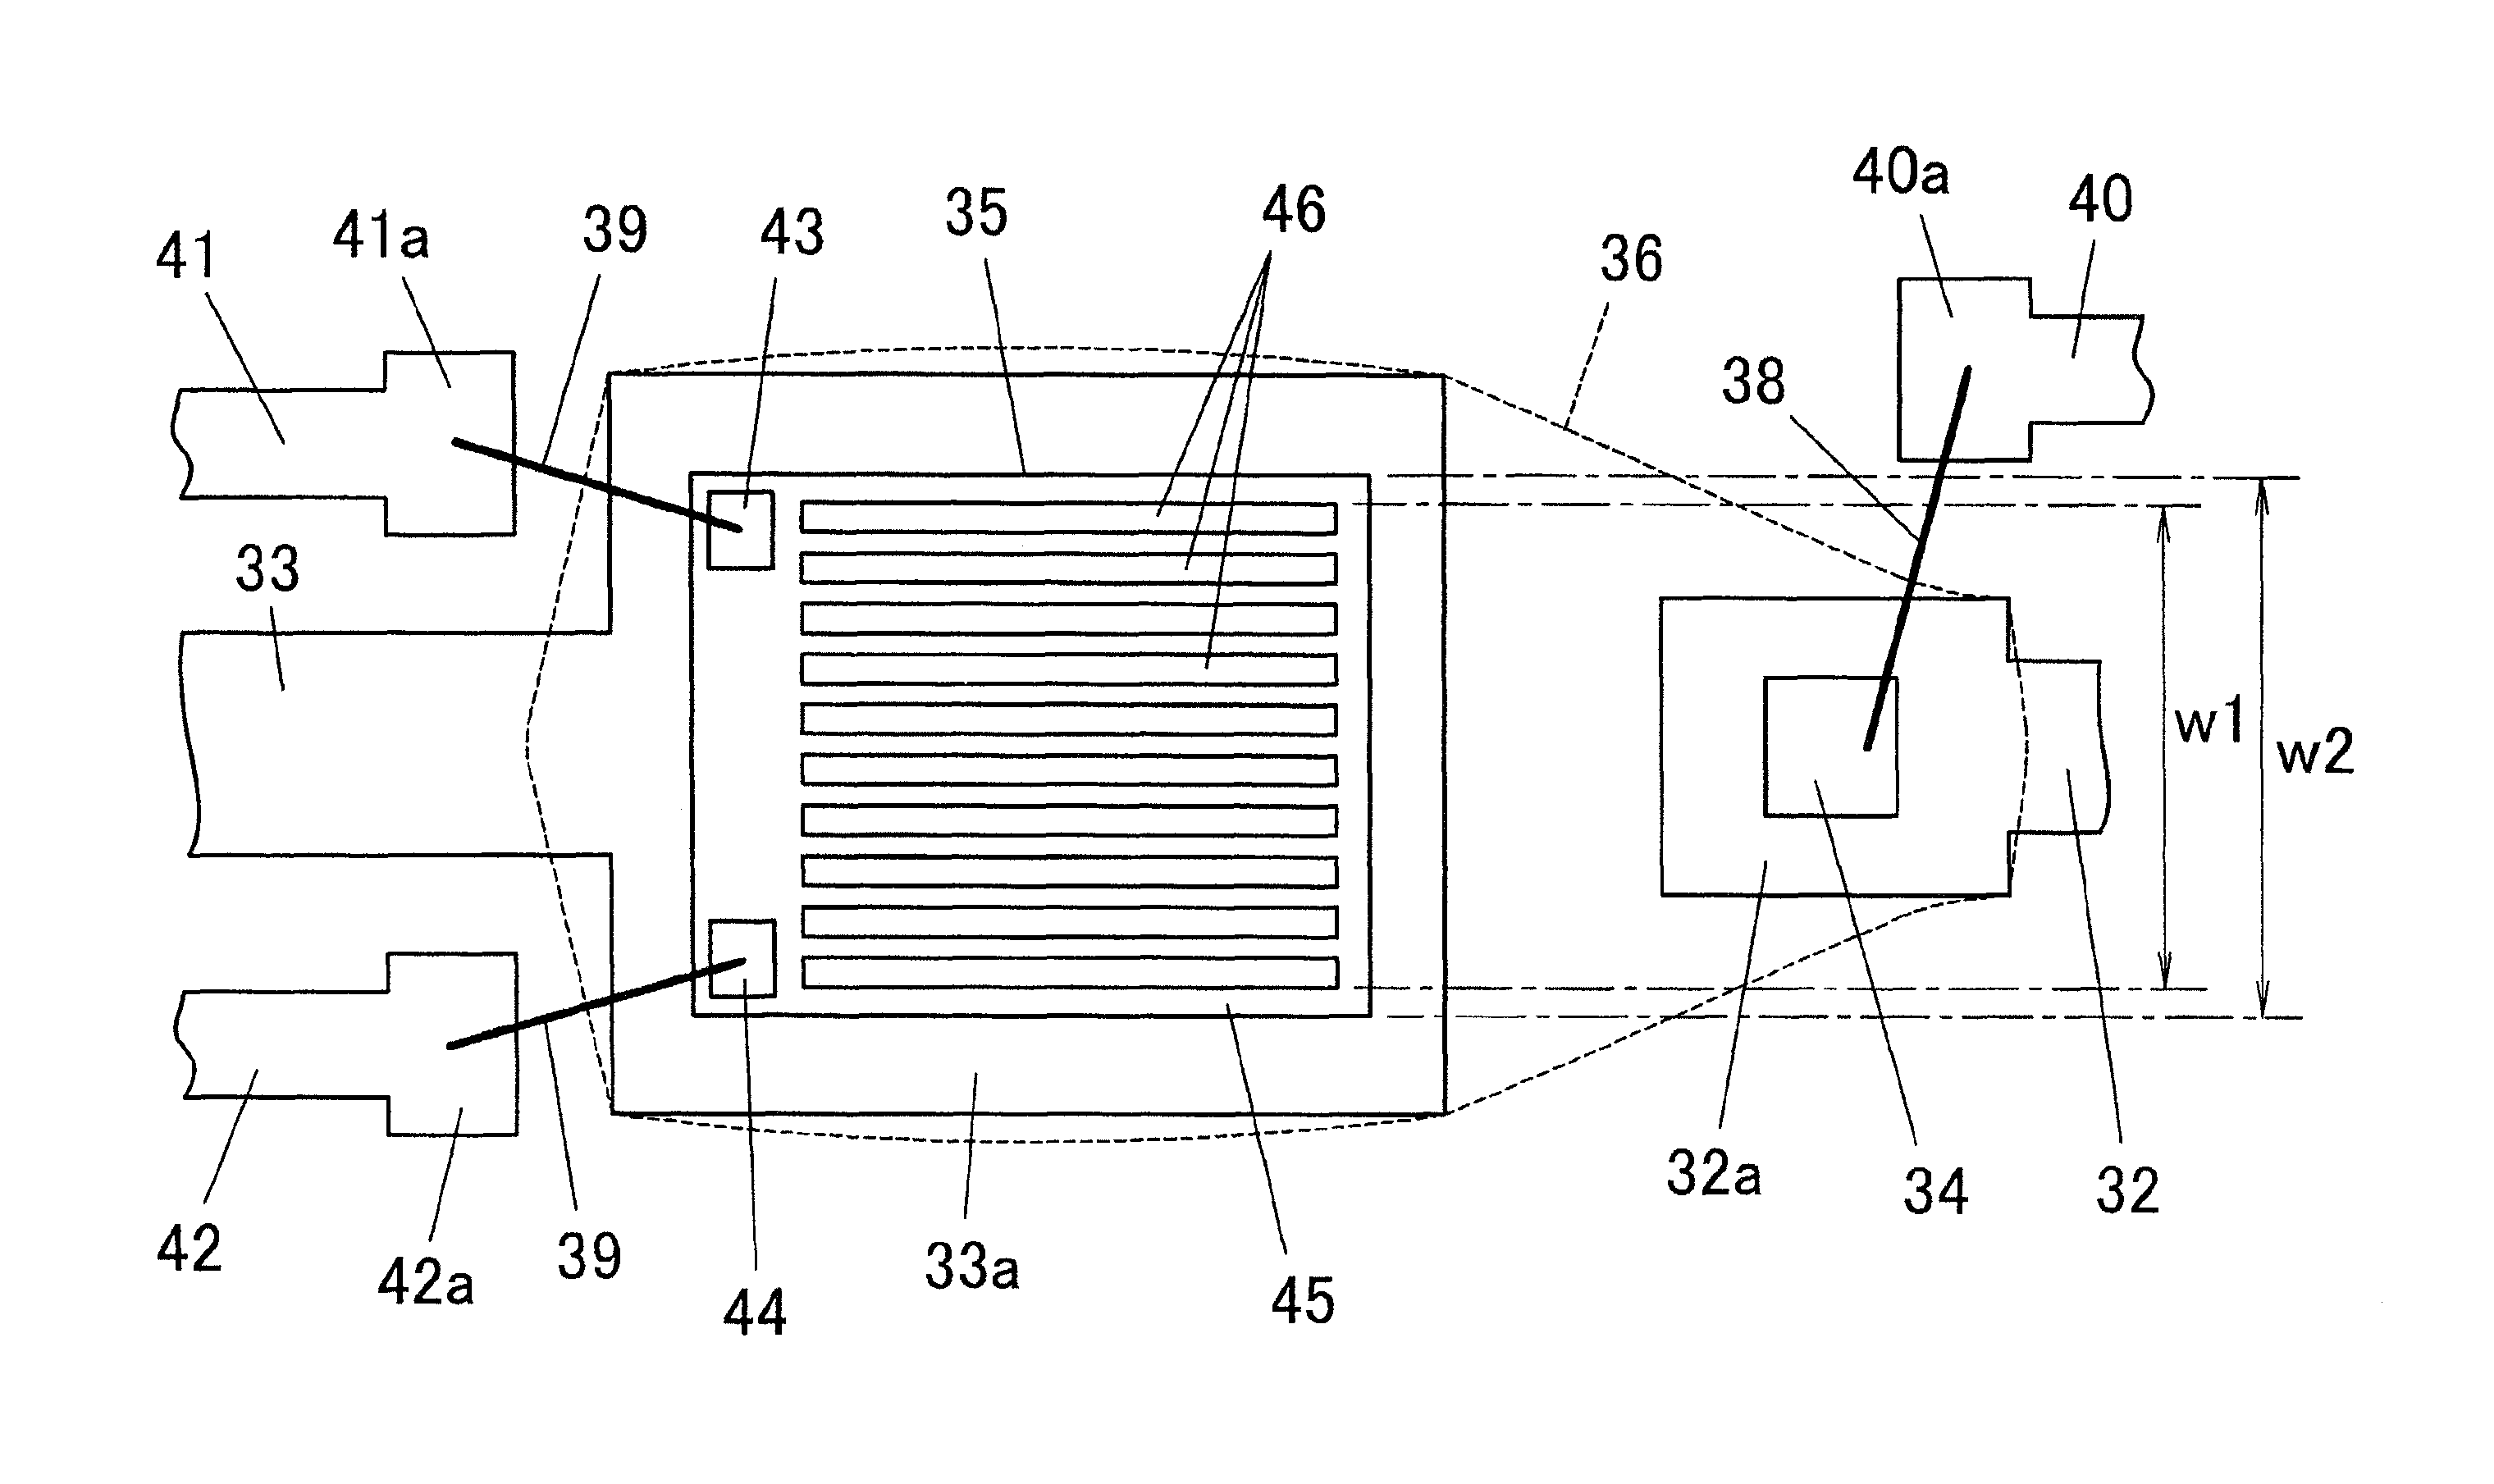 Optical coupler having first and second terminal boards and first and second conversion elements